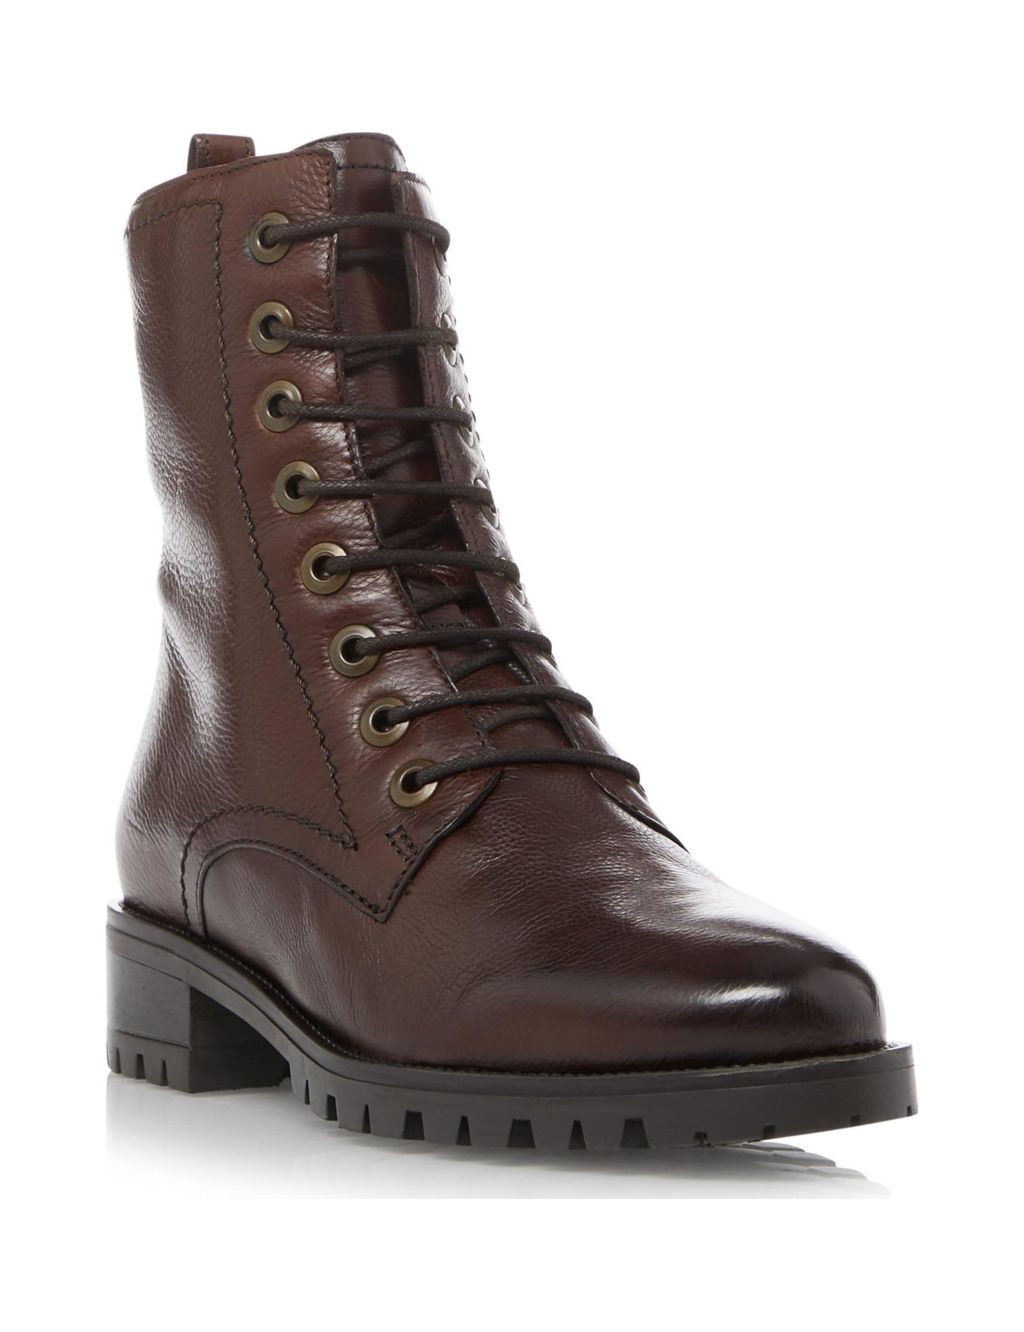 Leather Hiker Lace Up Ankle Boots image 2